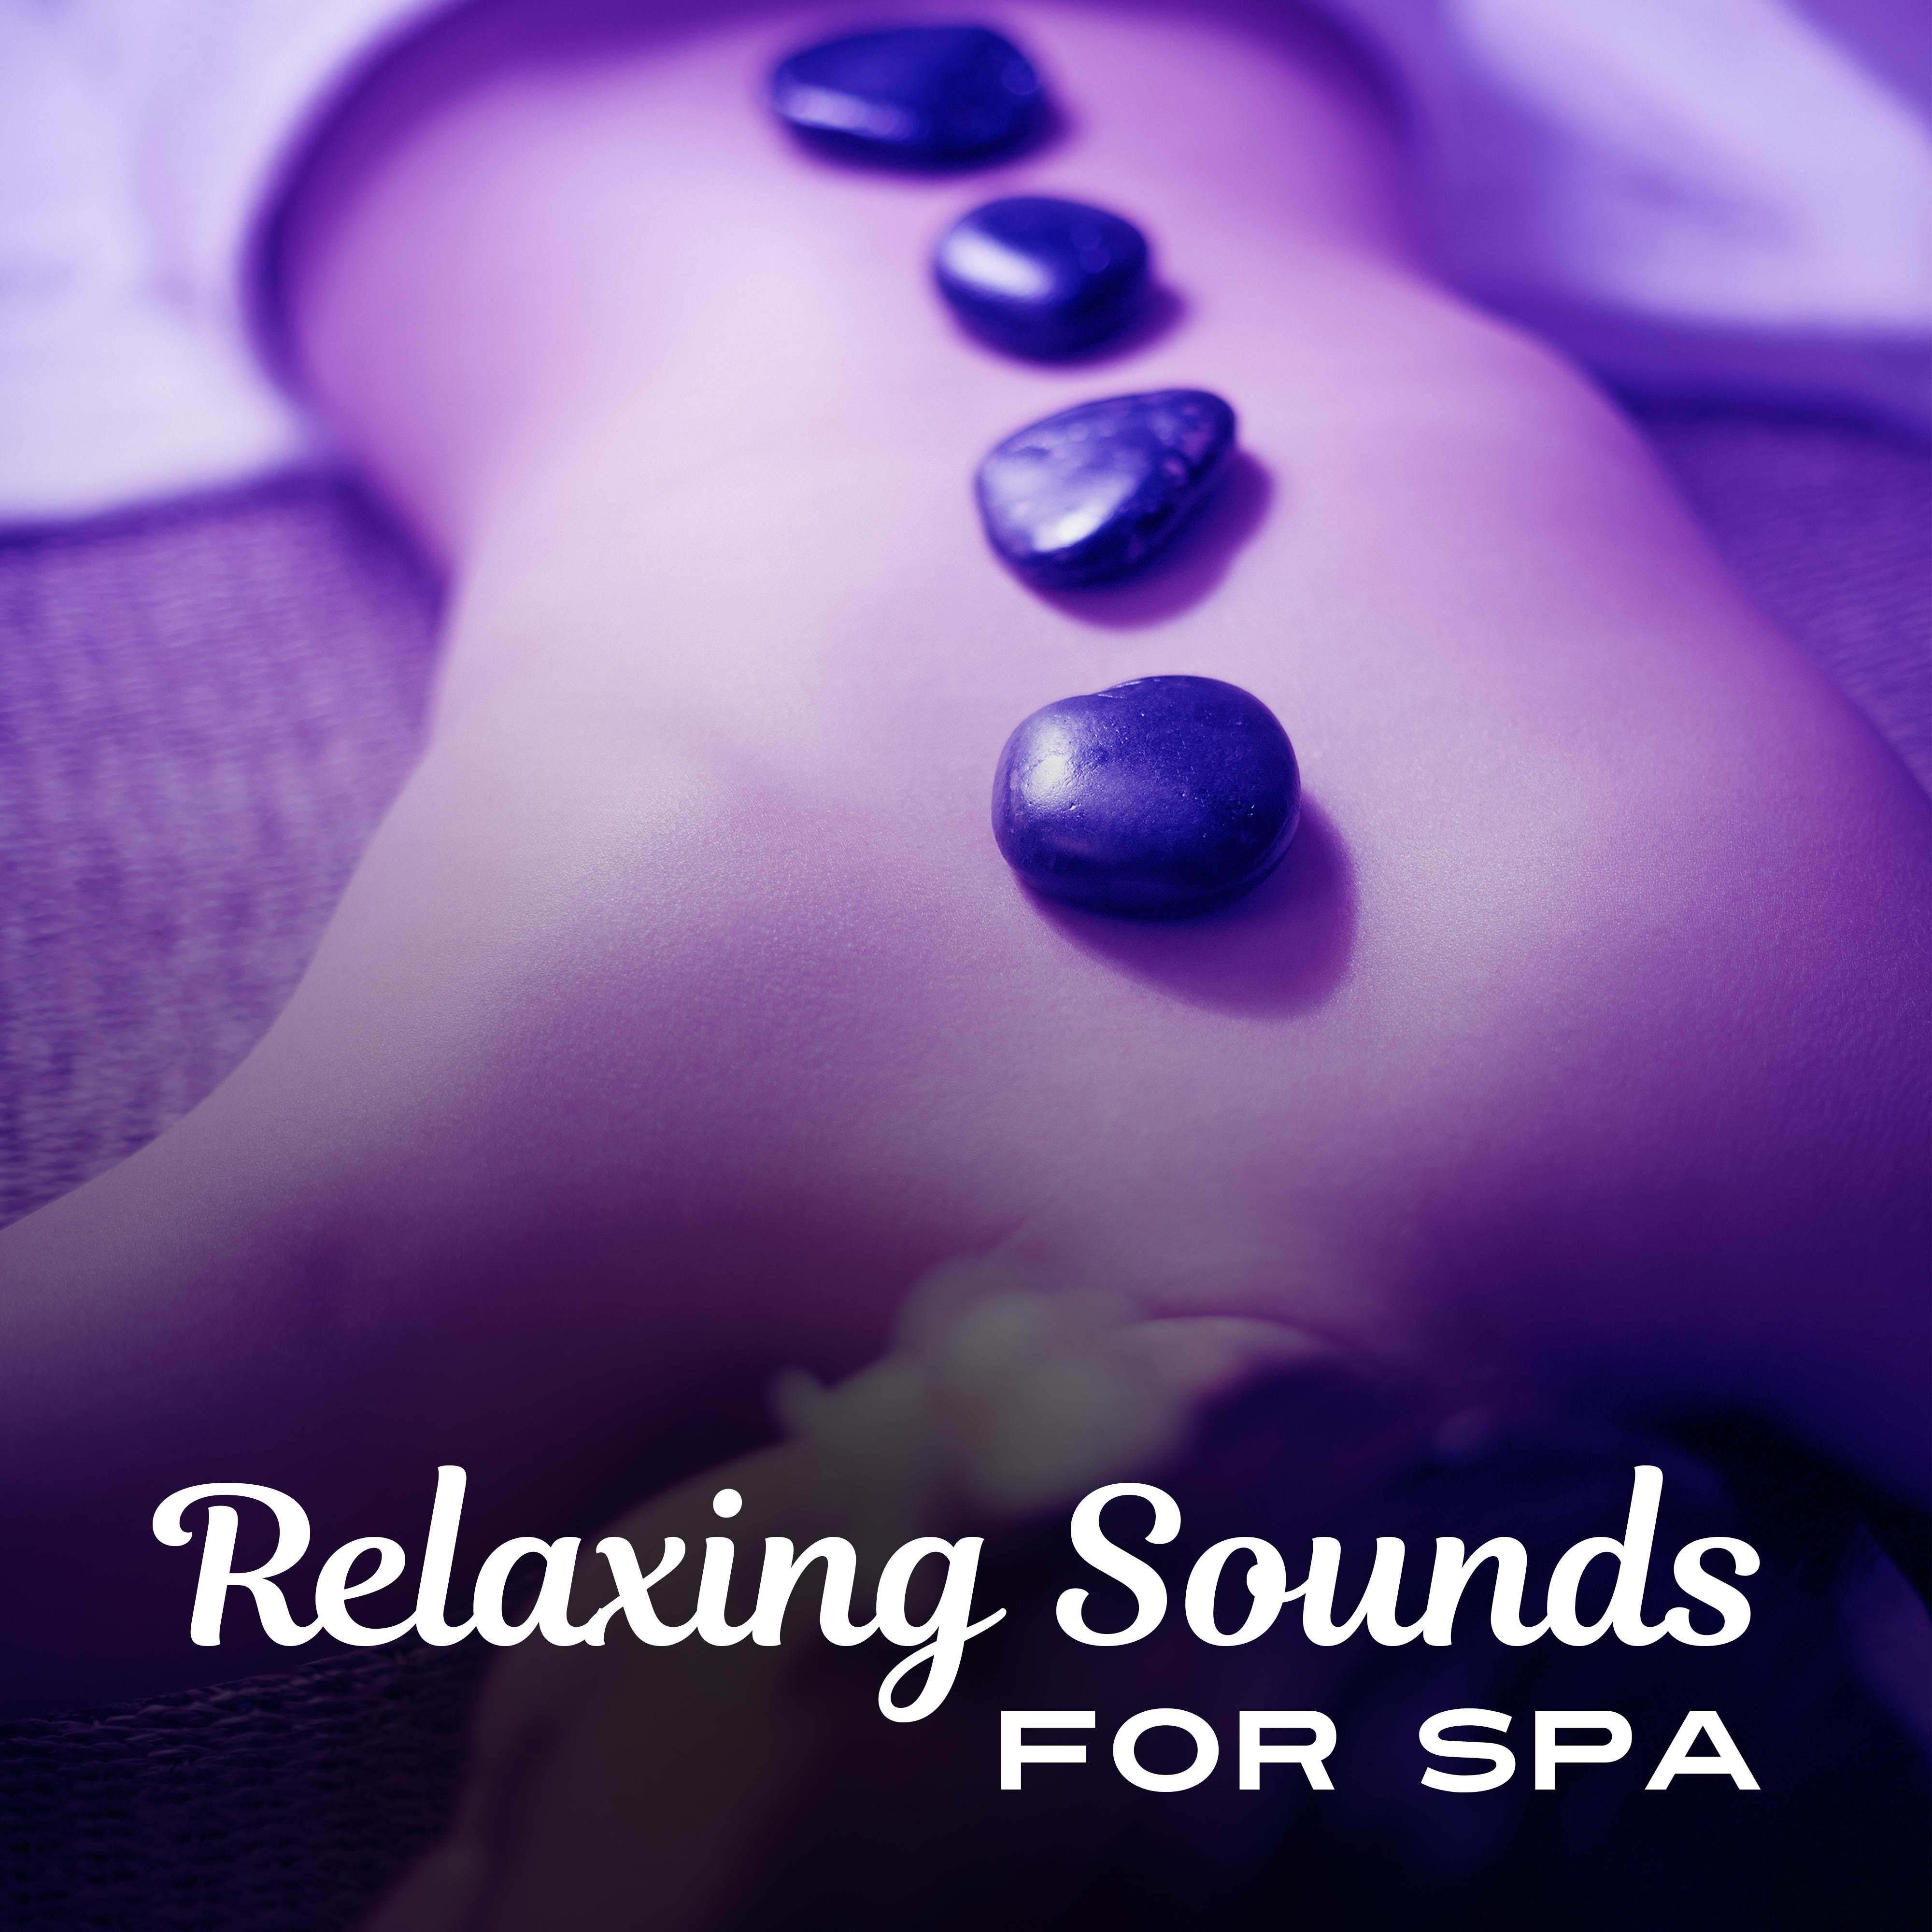 Relaxing Sounds for Spa – New Age Relaxation, Music for Massage, Sounds to Calm Down, Rest in Sauna